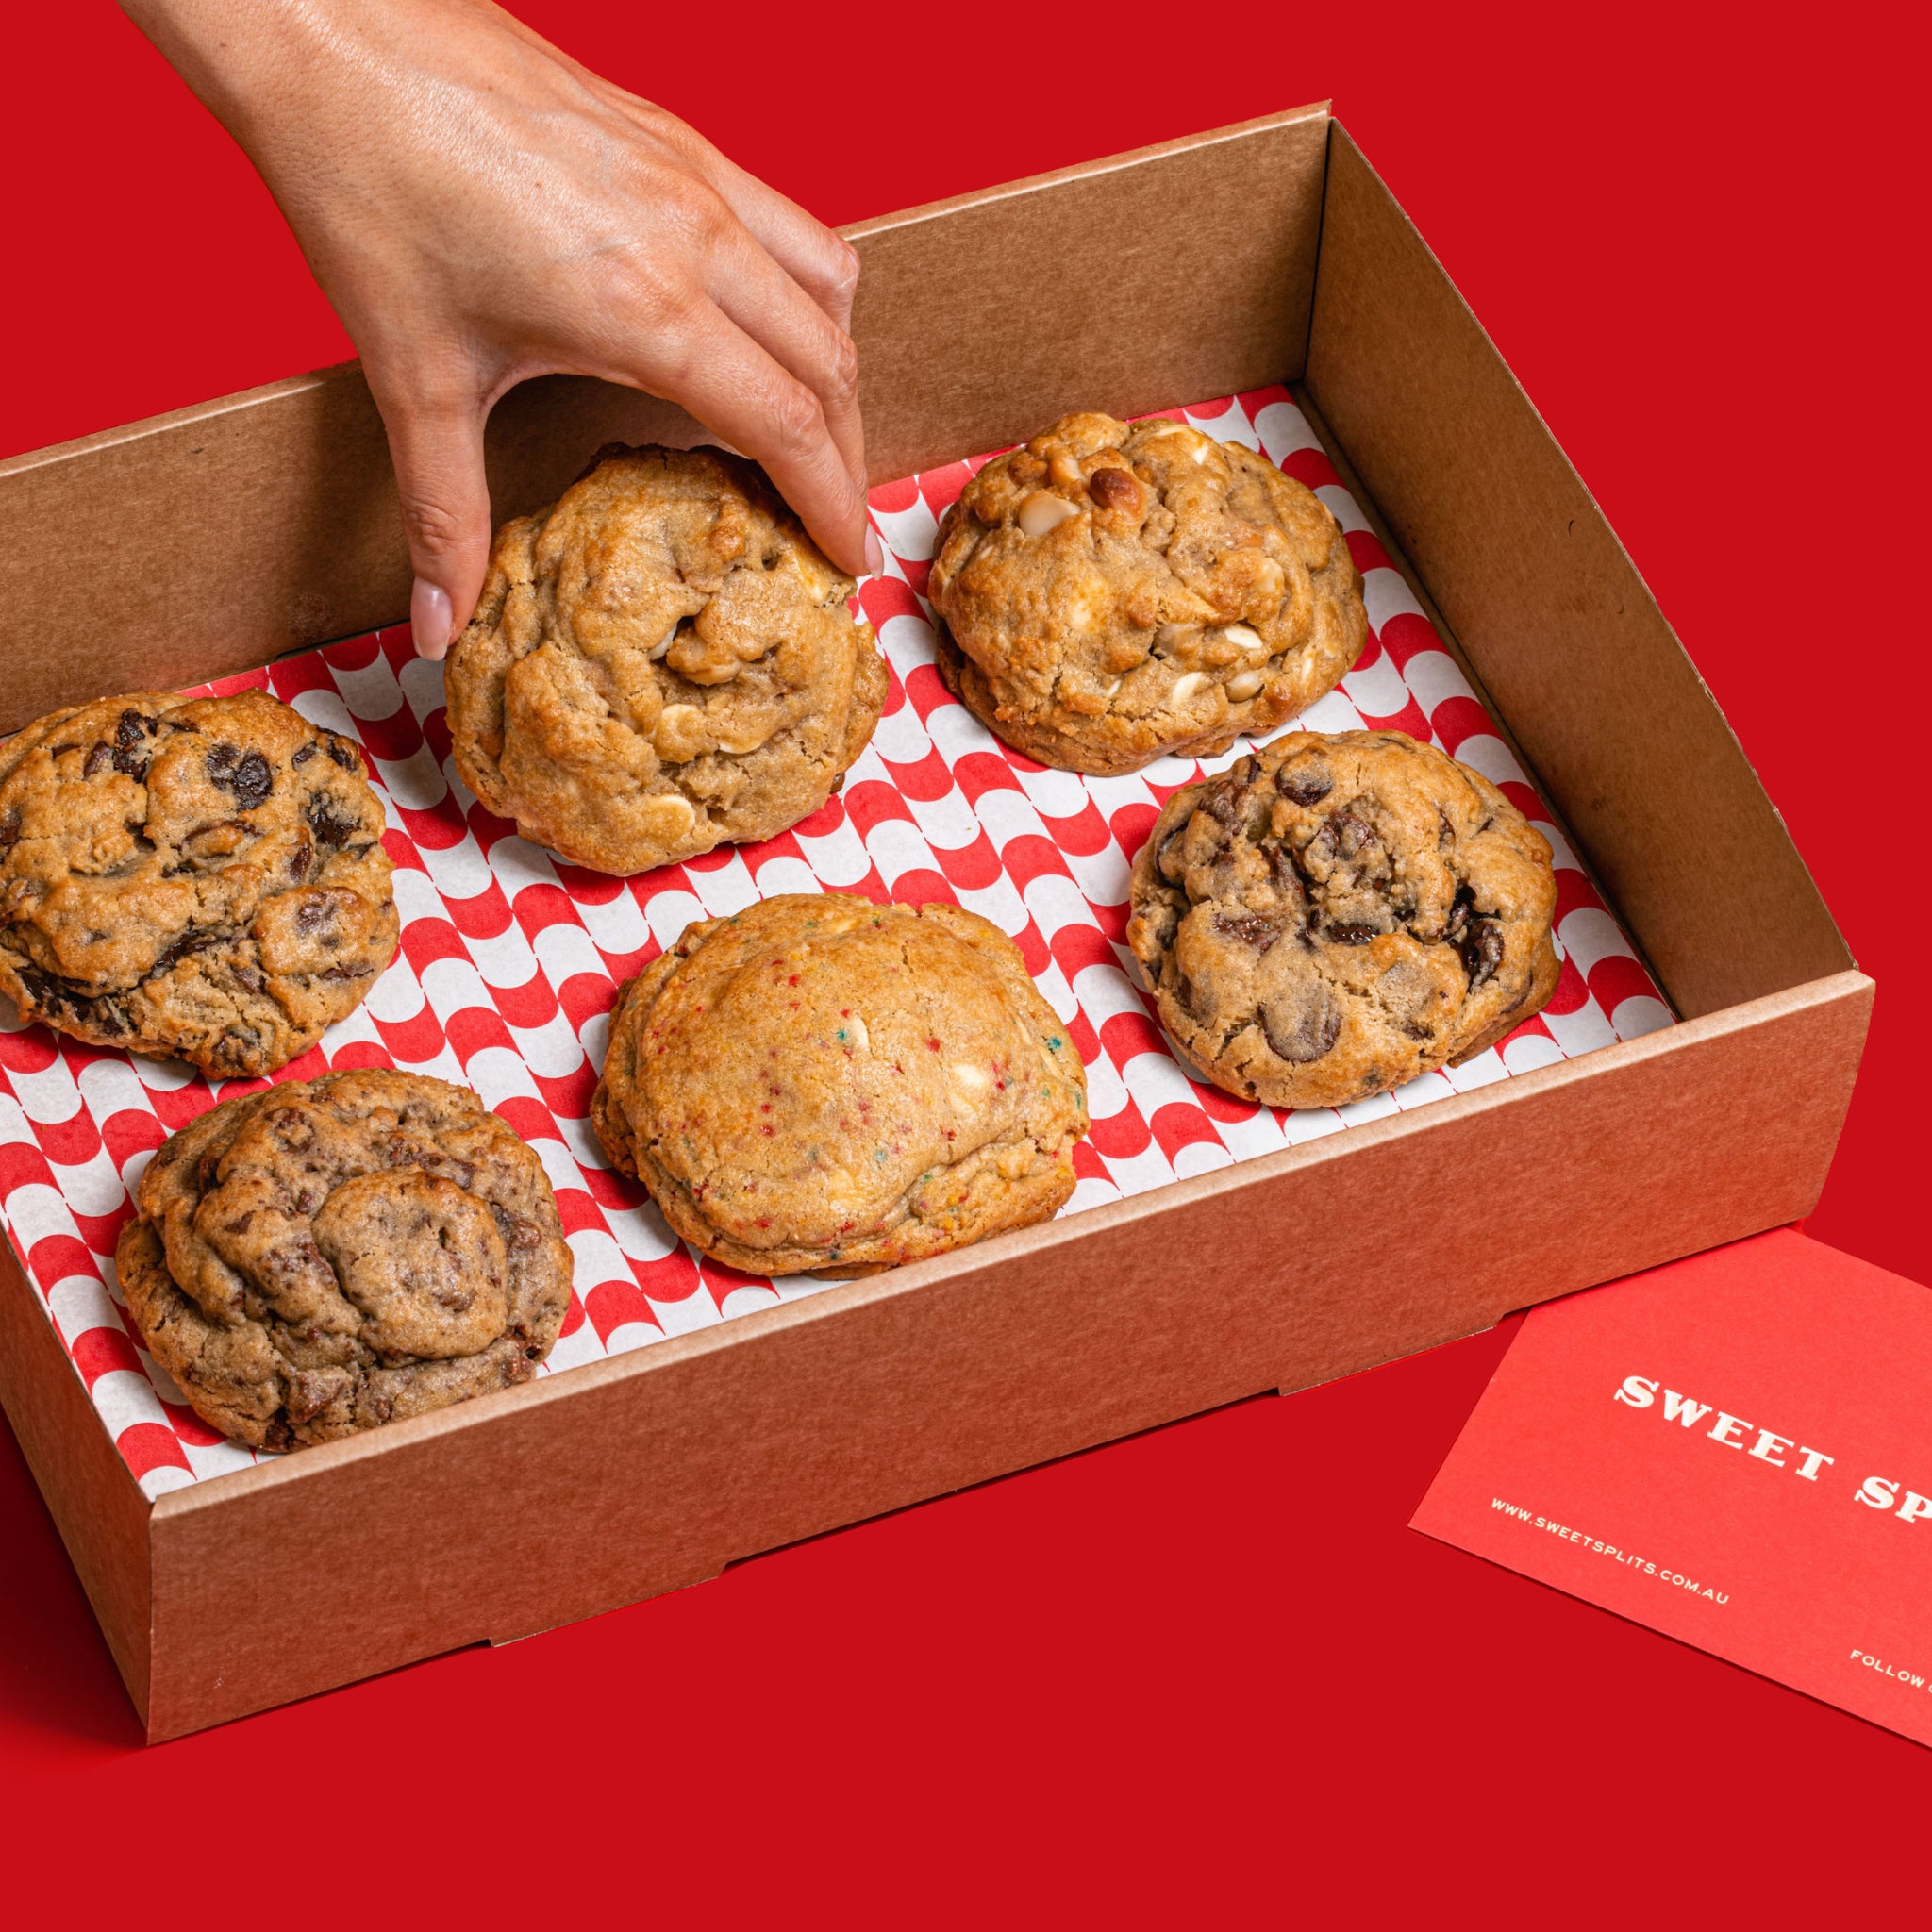 Build your box of 6 cookies!